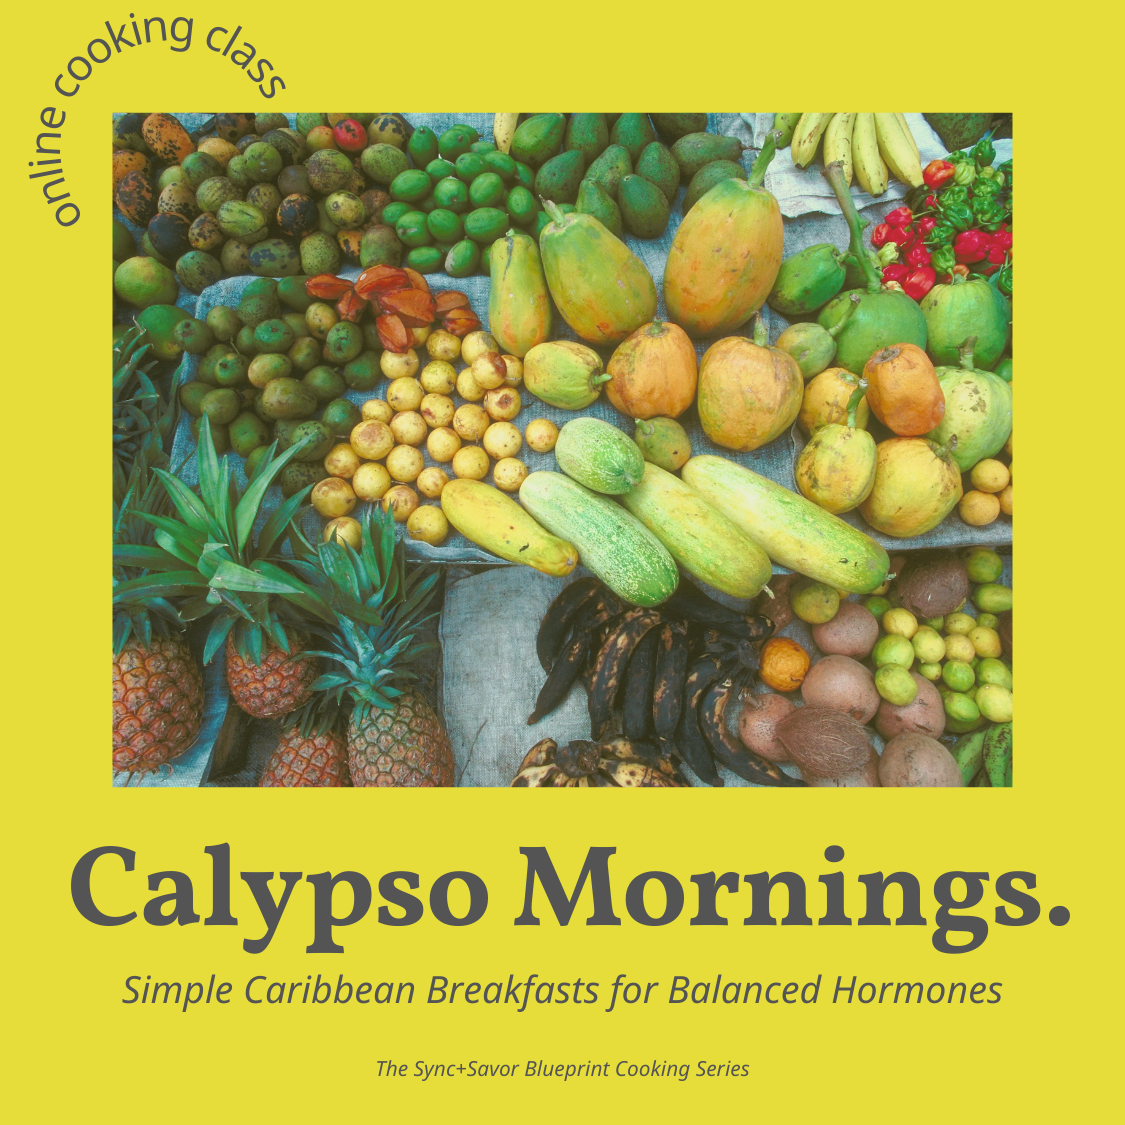 Calypso Mornings Cooking Class - Simple Caribbean Breakfasts for Balanced Hormones